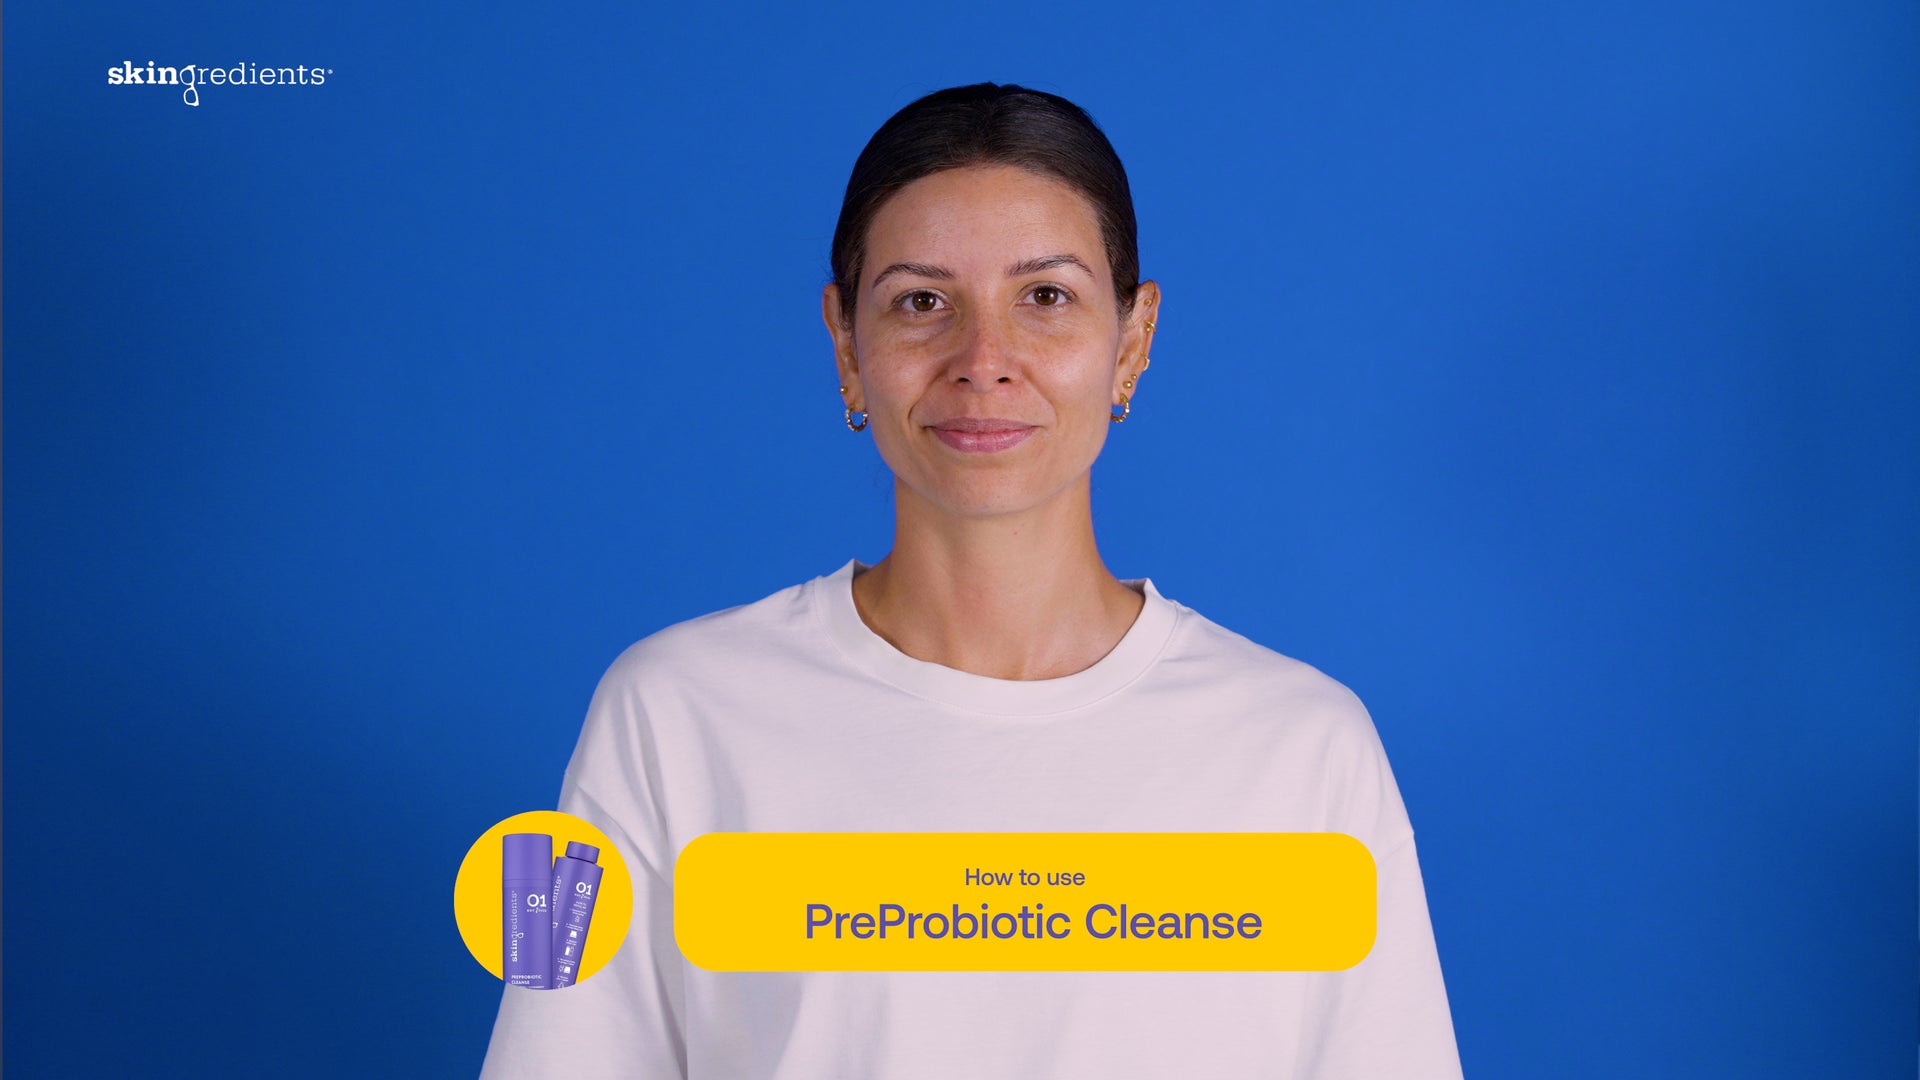 Load video: &lt;p&gt;A PreProbiotic Cleanse lover? Shop + save with this loyalty bundle.&lt;/p&gt;
&lt;p&gt;&lt;strong&gt;This bundle includes: &lt;/strong&gt;&lt;/p&gt;
&lt;p&gt;&lt;span data-mce-fragment=&quot;1&quot;&gt;&lt;strong&gt;x2 PreProbiotic Cleanse Hydrating + Nourishing Cleanser refills&lt;/strong&gt;. &lt;/span&gt;Skingredients® PreProbiotic Cleanse Hydrating Cleanser (100ml) is your dreamy, creamy, lightweight cleansing lotion that’s suitable for all hooman’s® skin – oily skin types too! It’s a cleanser that’s gentle enough to nurture + balance your skin, with the muscle to remove stubborn eye makeup and cleanse away the remains of the day. Because you deserve a cleanser that can do both. The clue is in the name: this cream cleanser is formulated with the three &#39;p&#39;s, it&#39;s brimming with prebiotics, probiotics and polyhydroxy acid (PHA). But it doesn&#39;t stop there, it’s also non-comedogenic and powerful enough to remove oil, pollution particles, SPF and makeup, including stubborn eye makeup, while remaining respectful to your skin’s natural barrier.&lt;/p&gt;
&lt;p&gt;PreProbiotic Cleanse is the 01 in the Skingredients KeyFour® routine. Use it in the AM + PM to cleanse and prep your skin for the skincare that follows. Our PreProbiotic Cleanse keeps moisture on lockdown and gives back to your skin, we’re sure you + your skin will be obsessed – the skincare hall of fame is calling, we think! Don’t just take our word for it… PrePro received the crème de la crème of recognition at the Marie Claire Prix d’Excellence Awards 2022, Highly Commended within the Total Skincare category across the total beauty market. PrePro also won “Best Cleanser for Sensitive Skin” at the Marie Claire Skin Awards 2021 + GOLD for &quot;Cleanse &amp; Glow Hero&quot; at the Get The Gloss Beauty &amp; Wellness Awards 2021.&lt;/p&gt;
&lt;p&gt;&lt;strong&gt;NERDIE NOTE:&lt;/strong&gt; YOU MUST HAVE PURCHASED YOUR PRIMARY PACK BEFORE SWITCHING TO OUR VALUE-SAVING PLANET-FRIENDLY REFILLS!&lt;/p&gt;